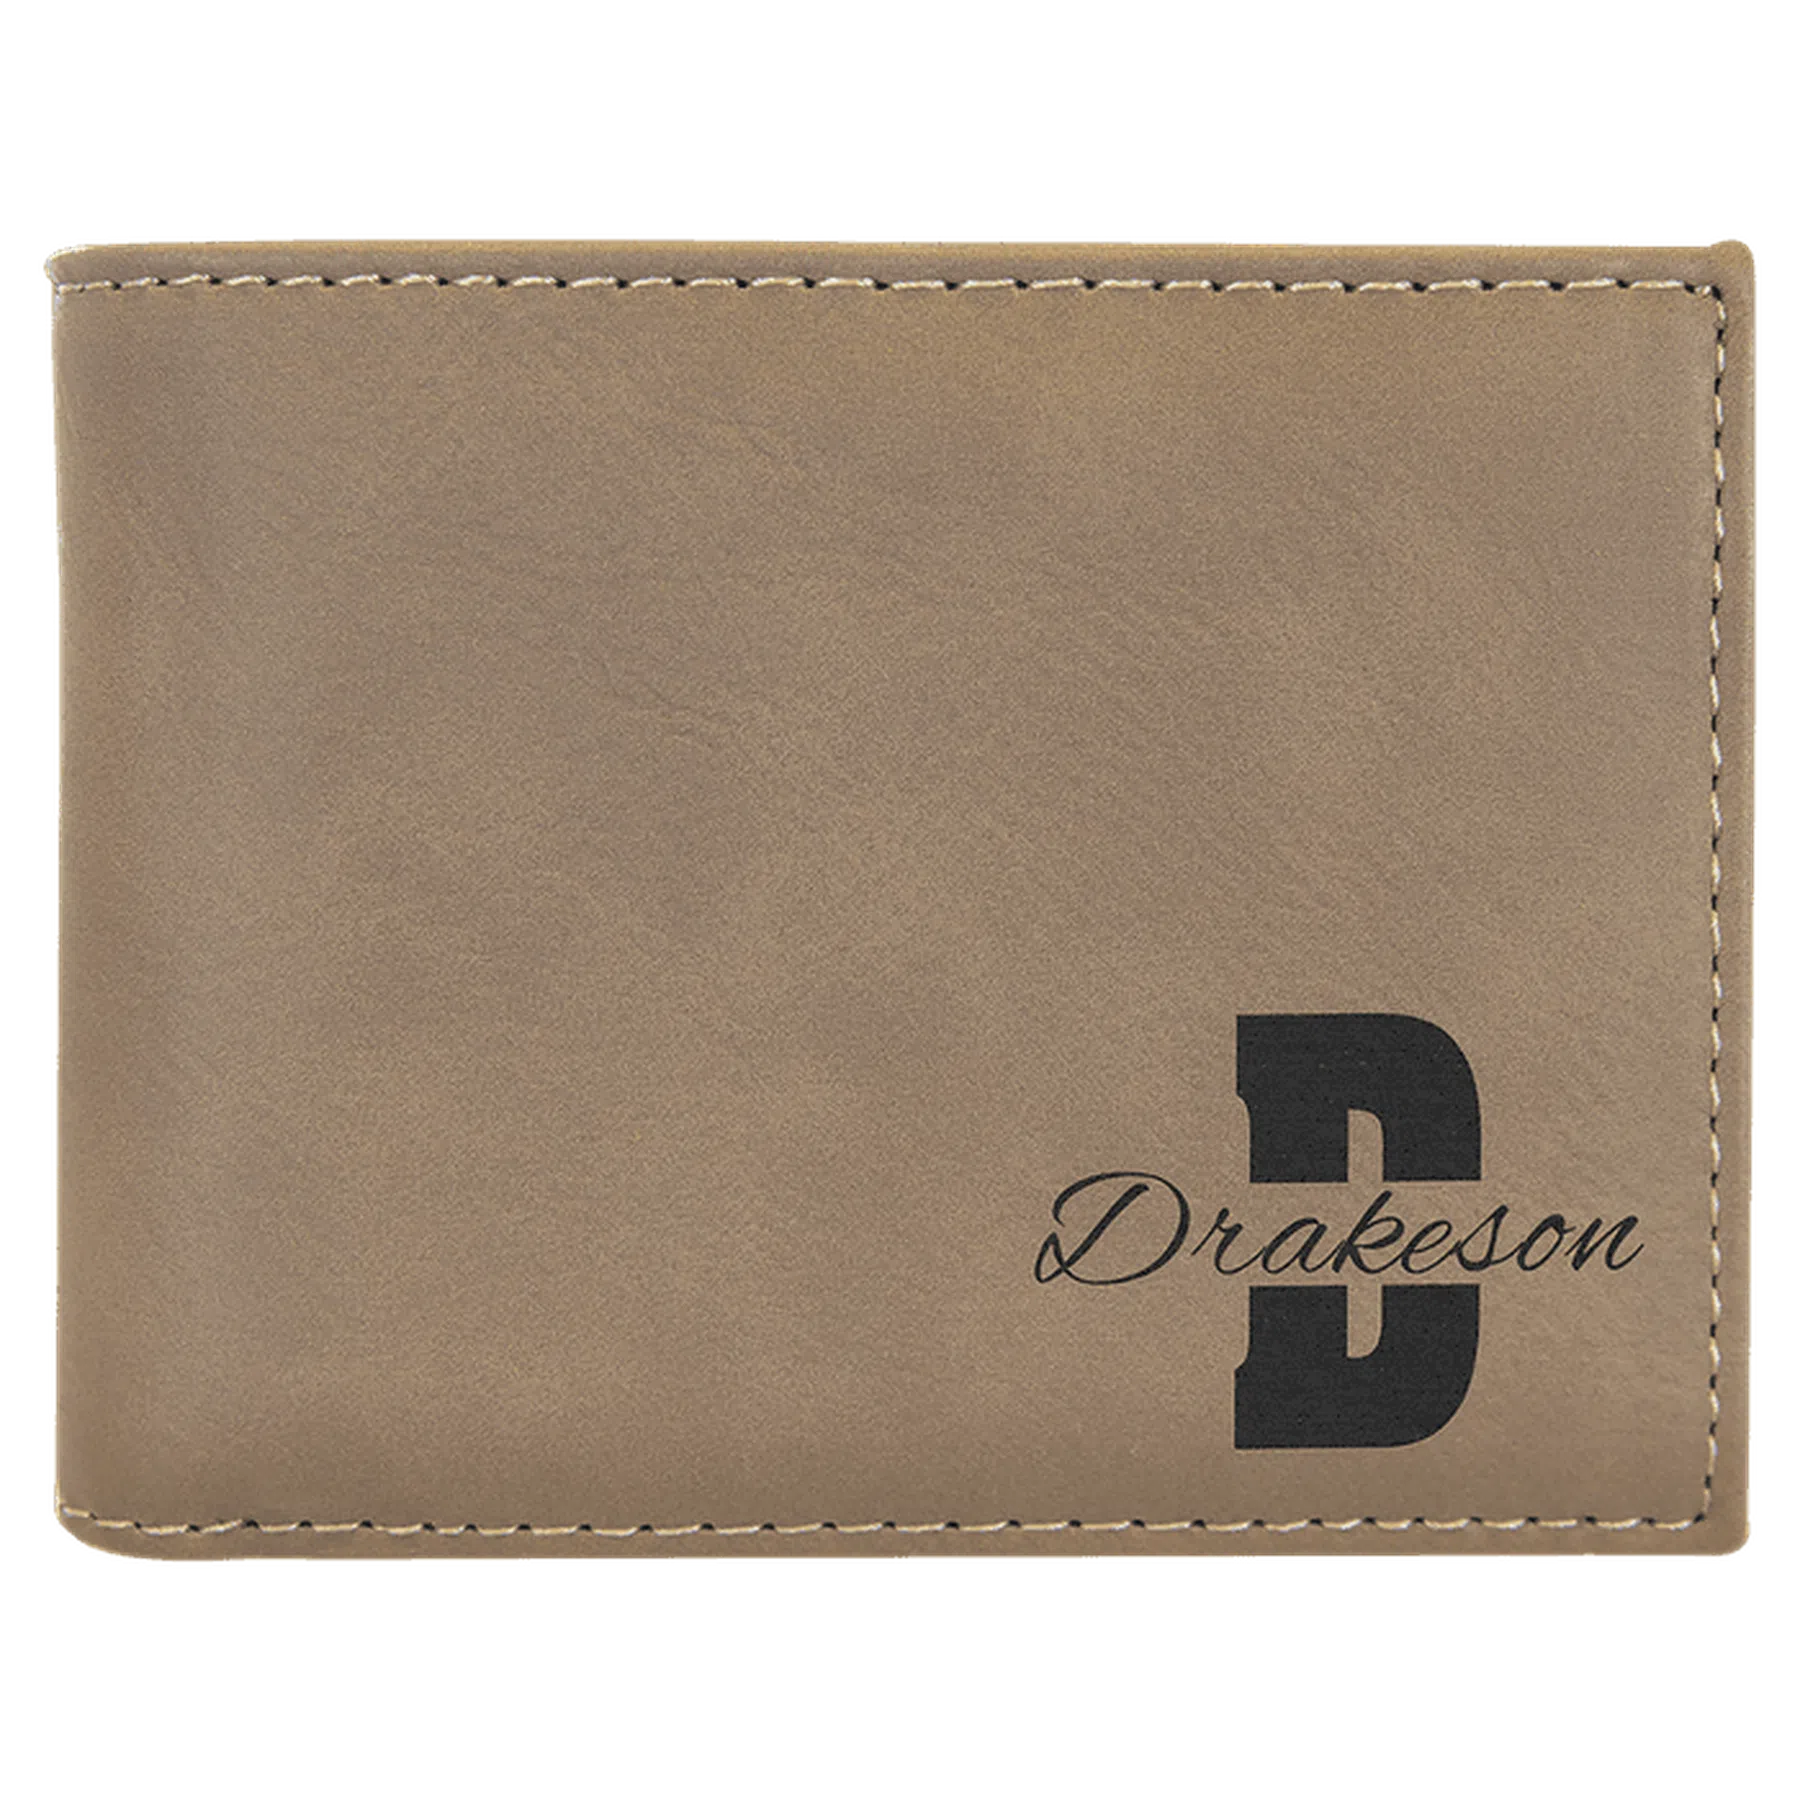 Leatherette Bifold Wallet with ID Flip Display